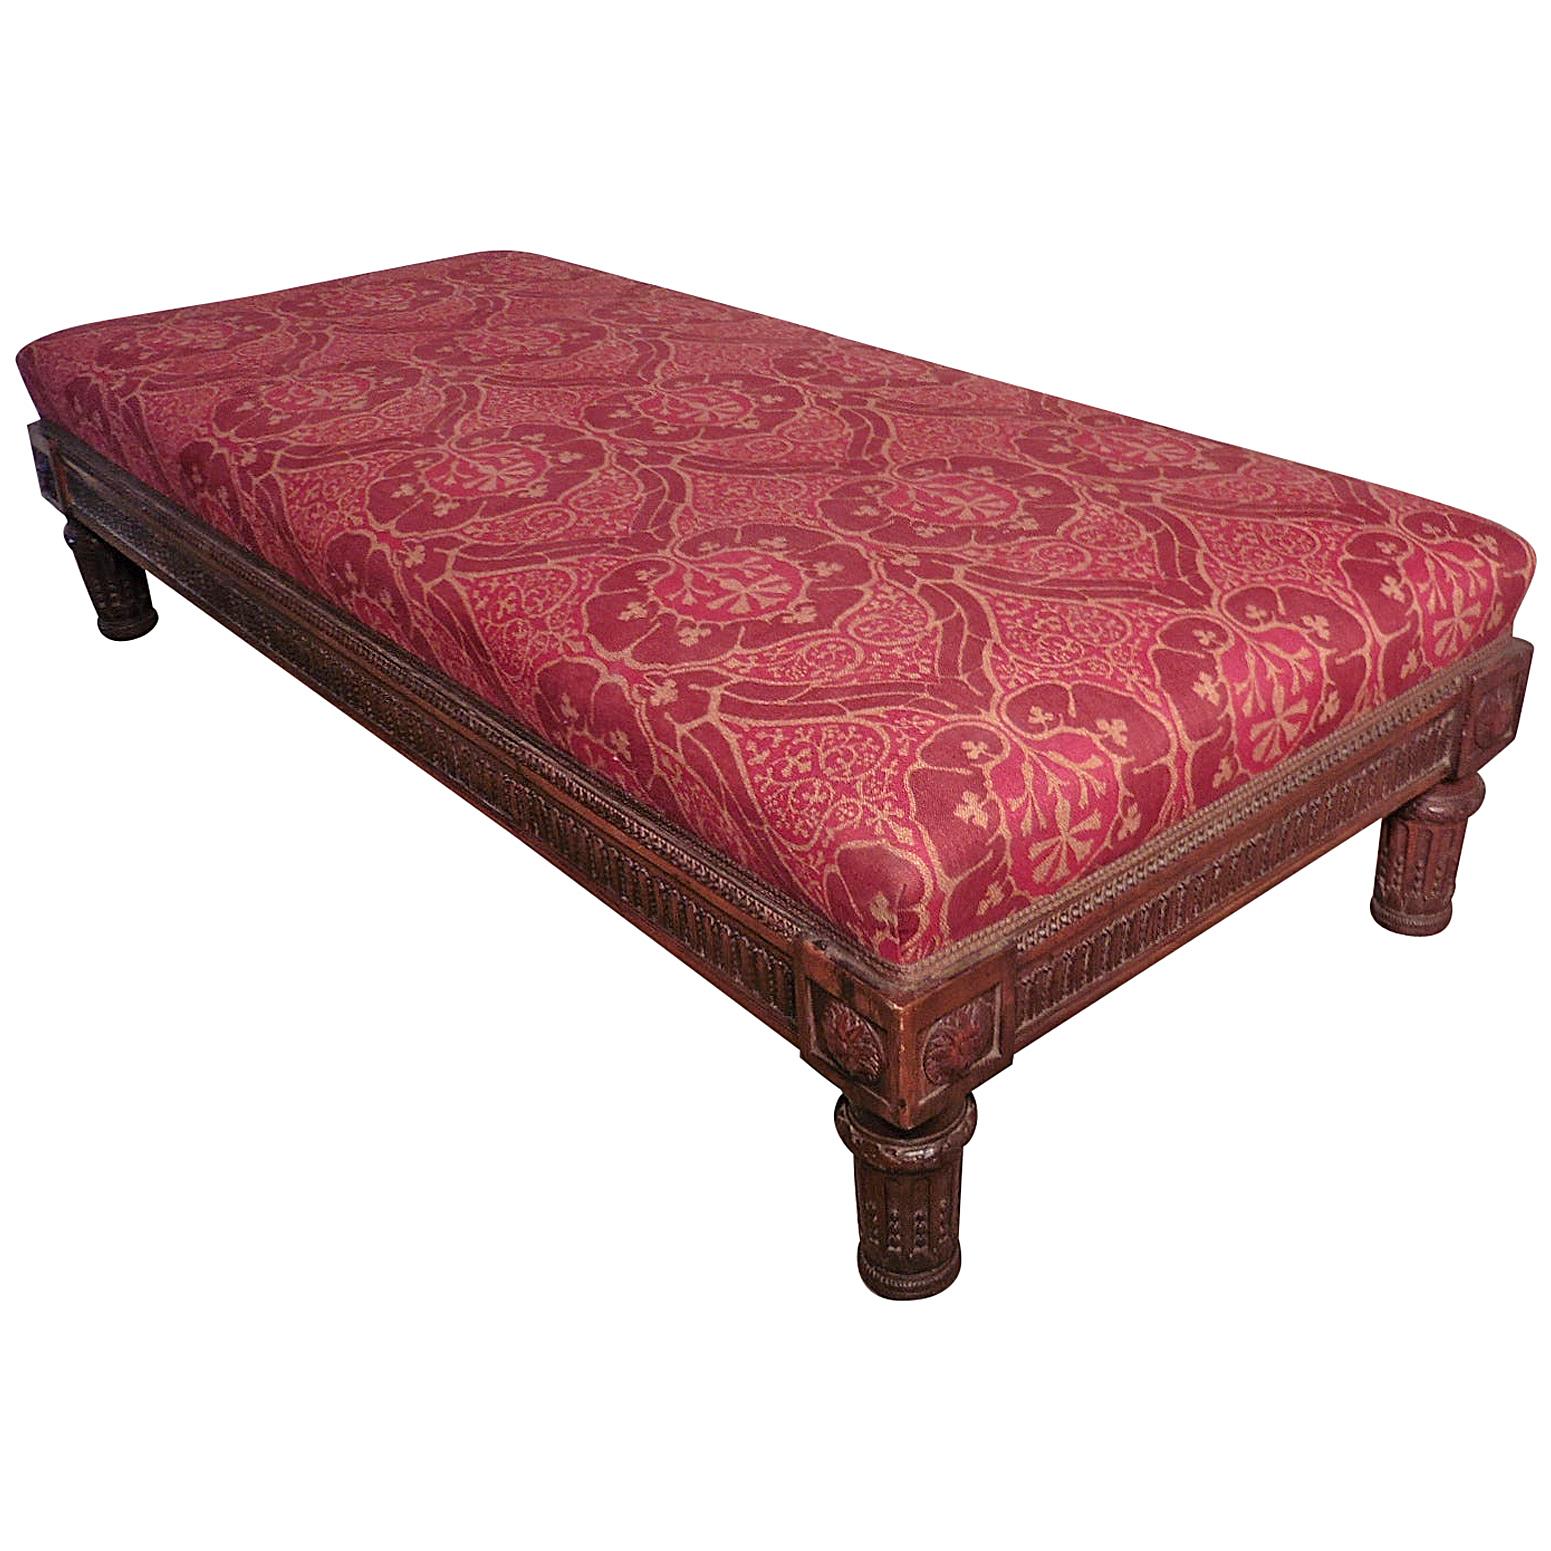 Charming 19th Century Upholstered Window Seat or Day Bed